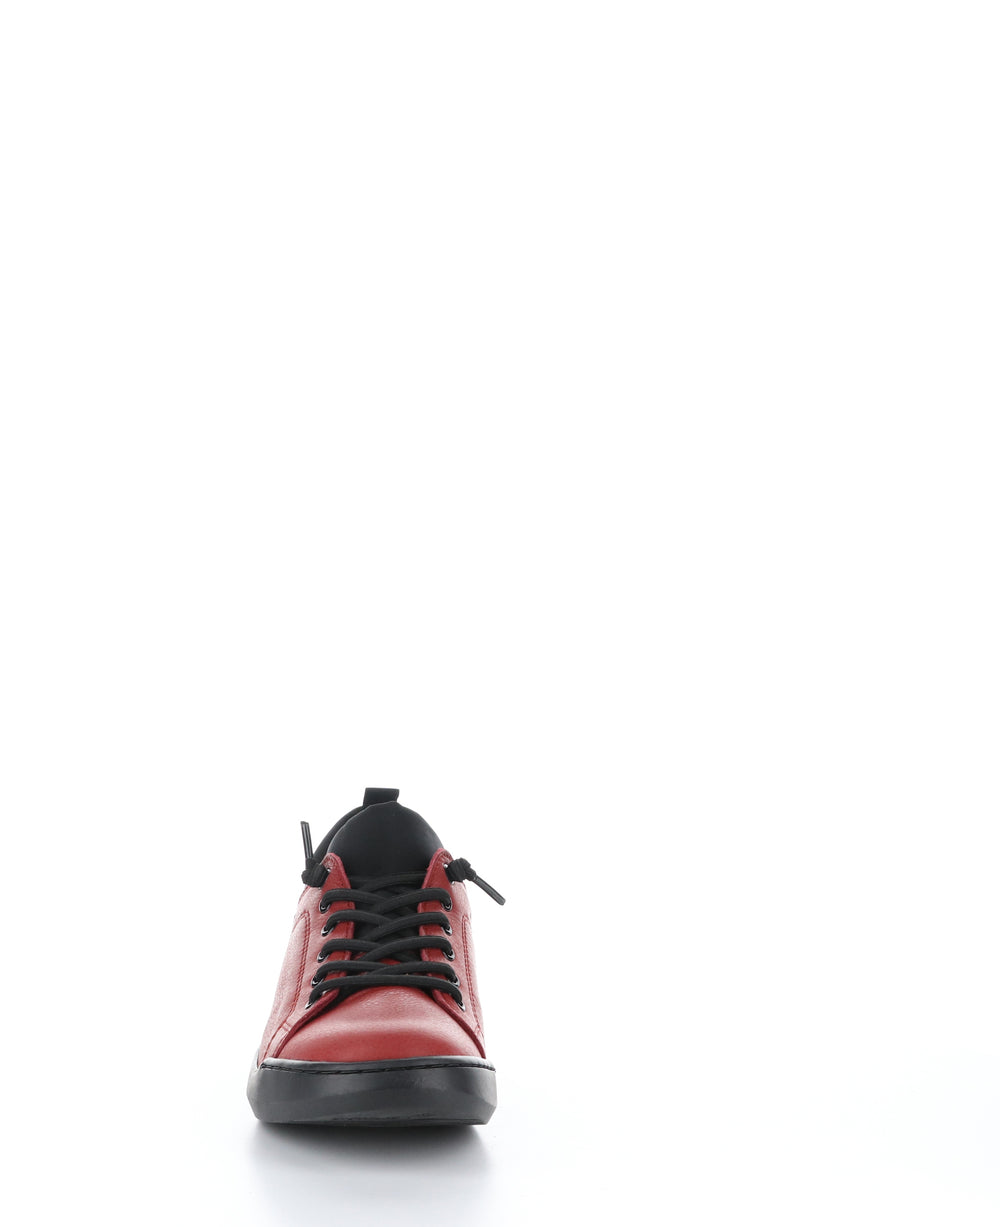 BONN667SOF Red Round Toe Shoes|BONN667SOF Chaussures à Bout Rond in Rouge